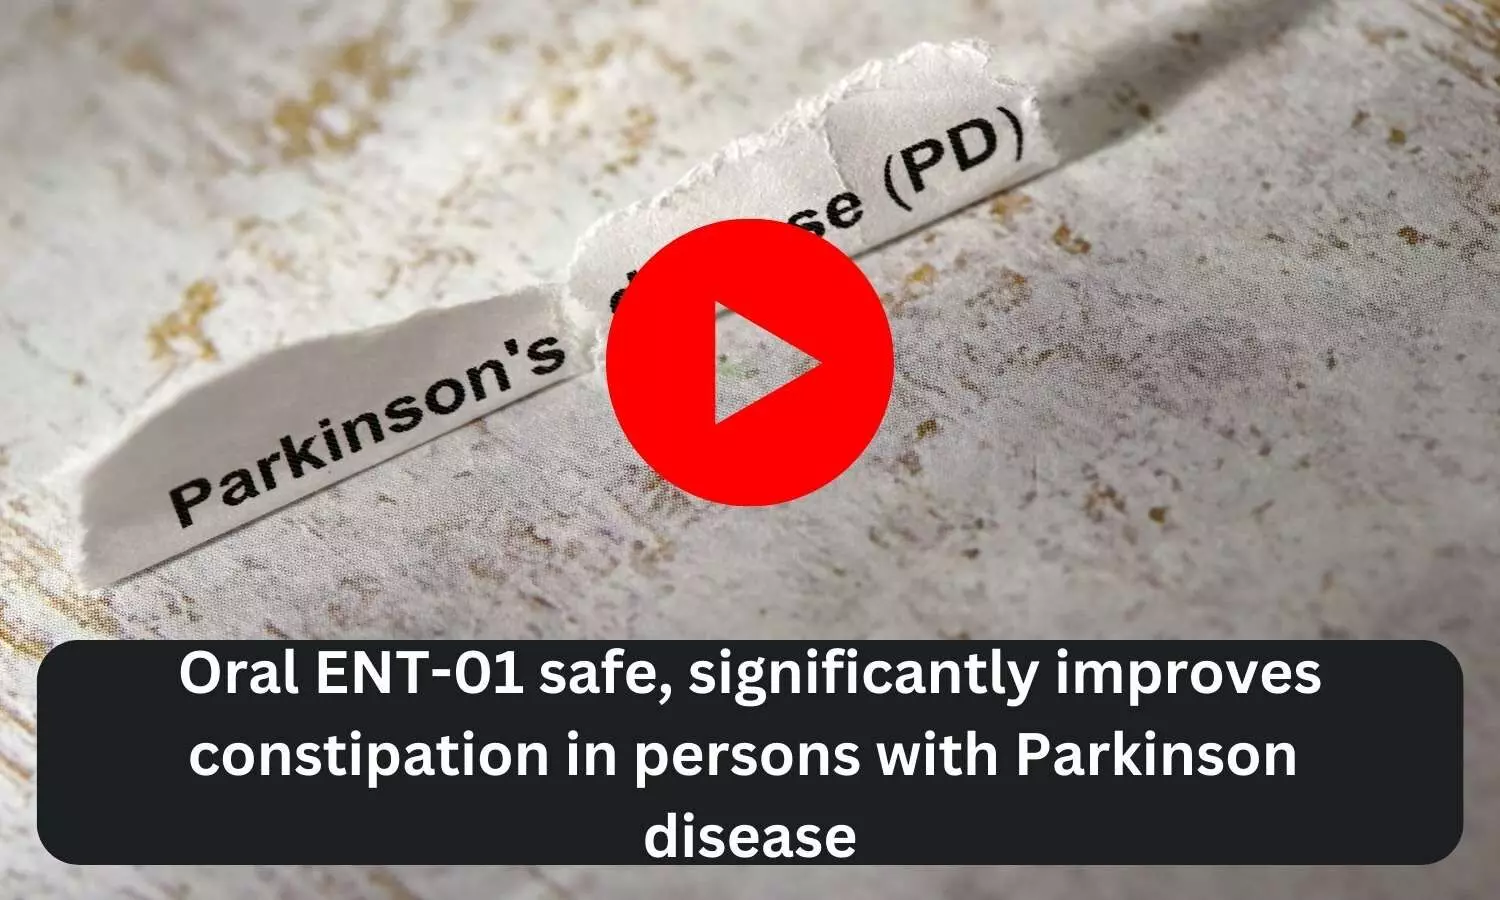 Oral ENT-01 safe, significantly improves constipation in persons with Parkinson disease